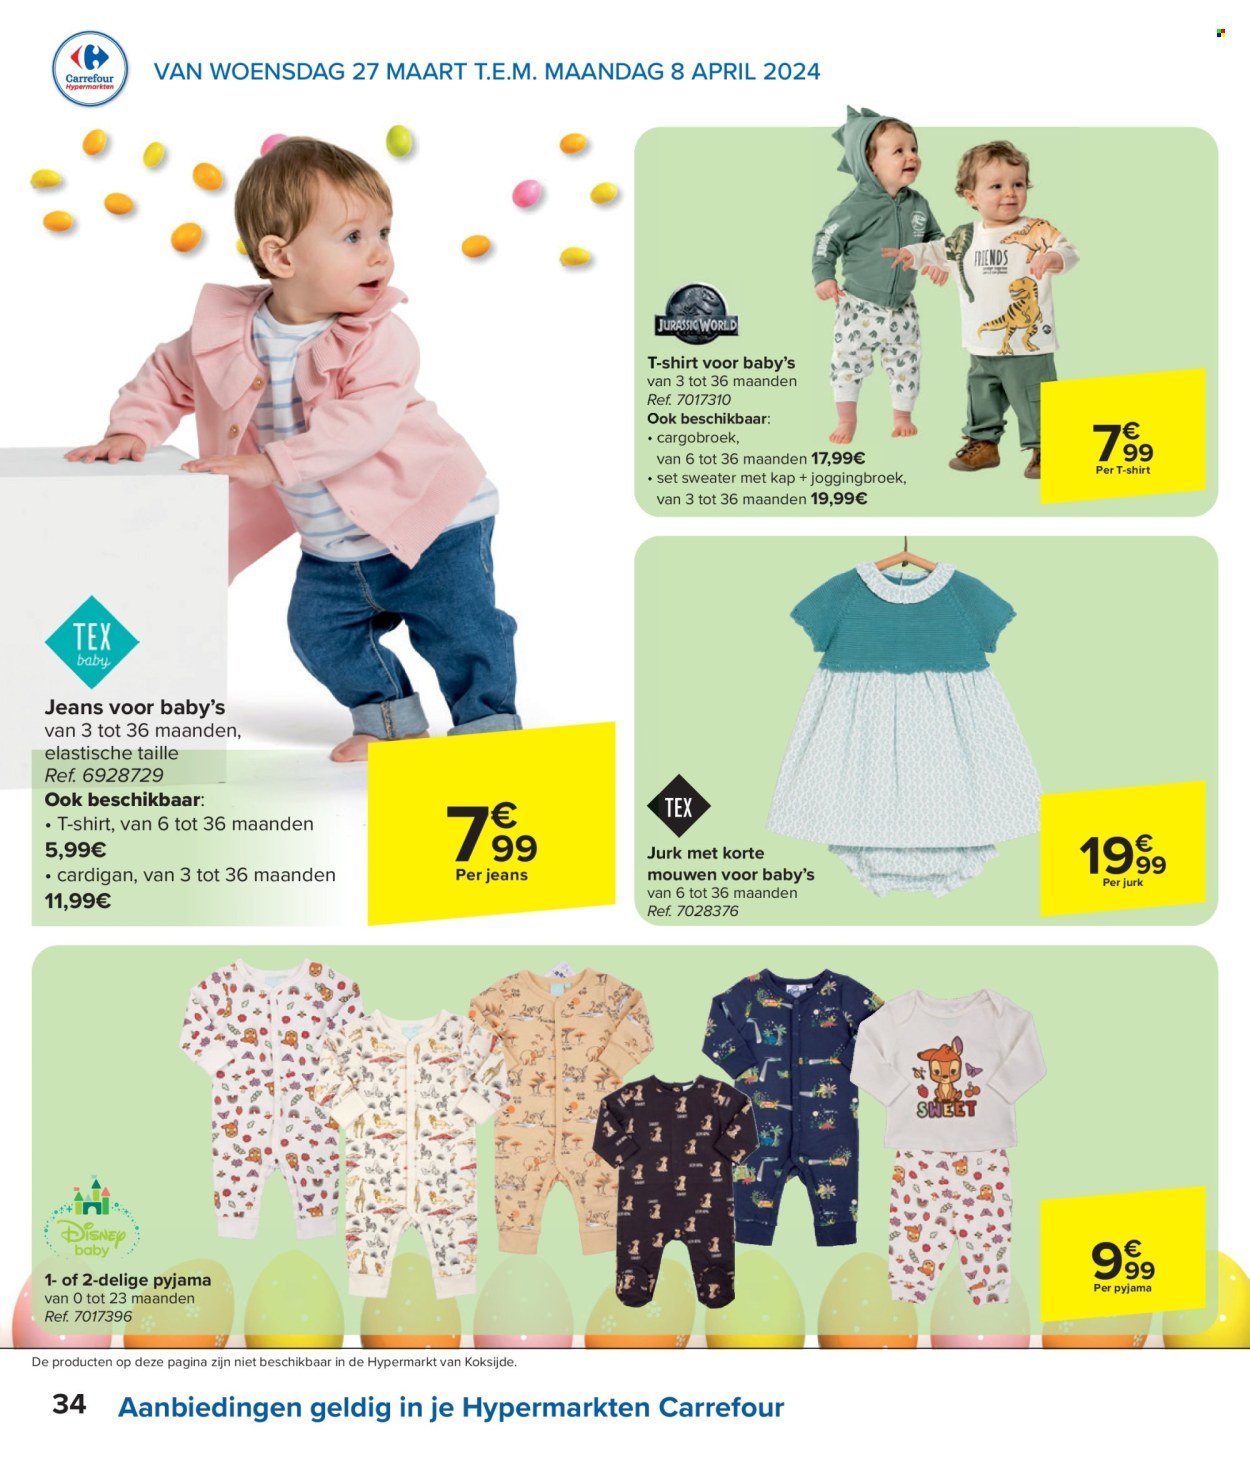 Catalogue Carrefour hypermarkt - 27.3.2024 - 8.4.2024. Page 34.